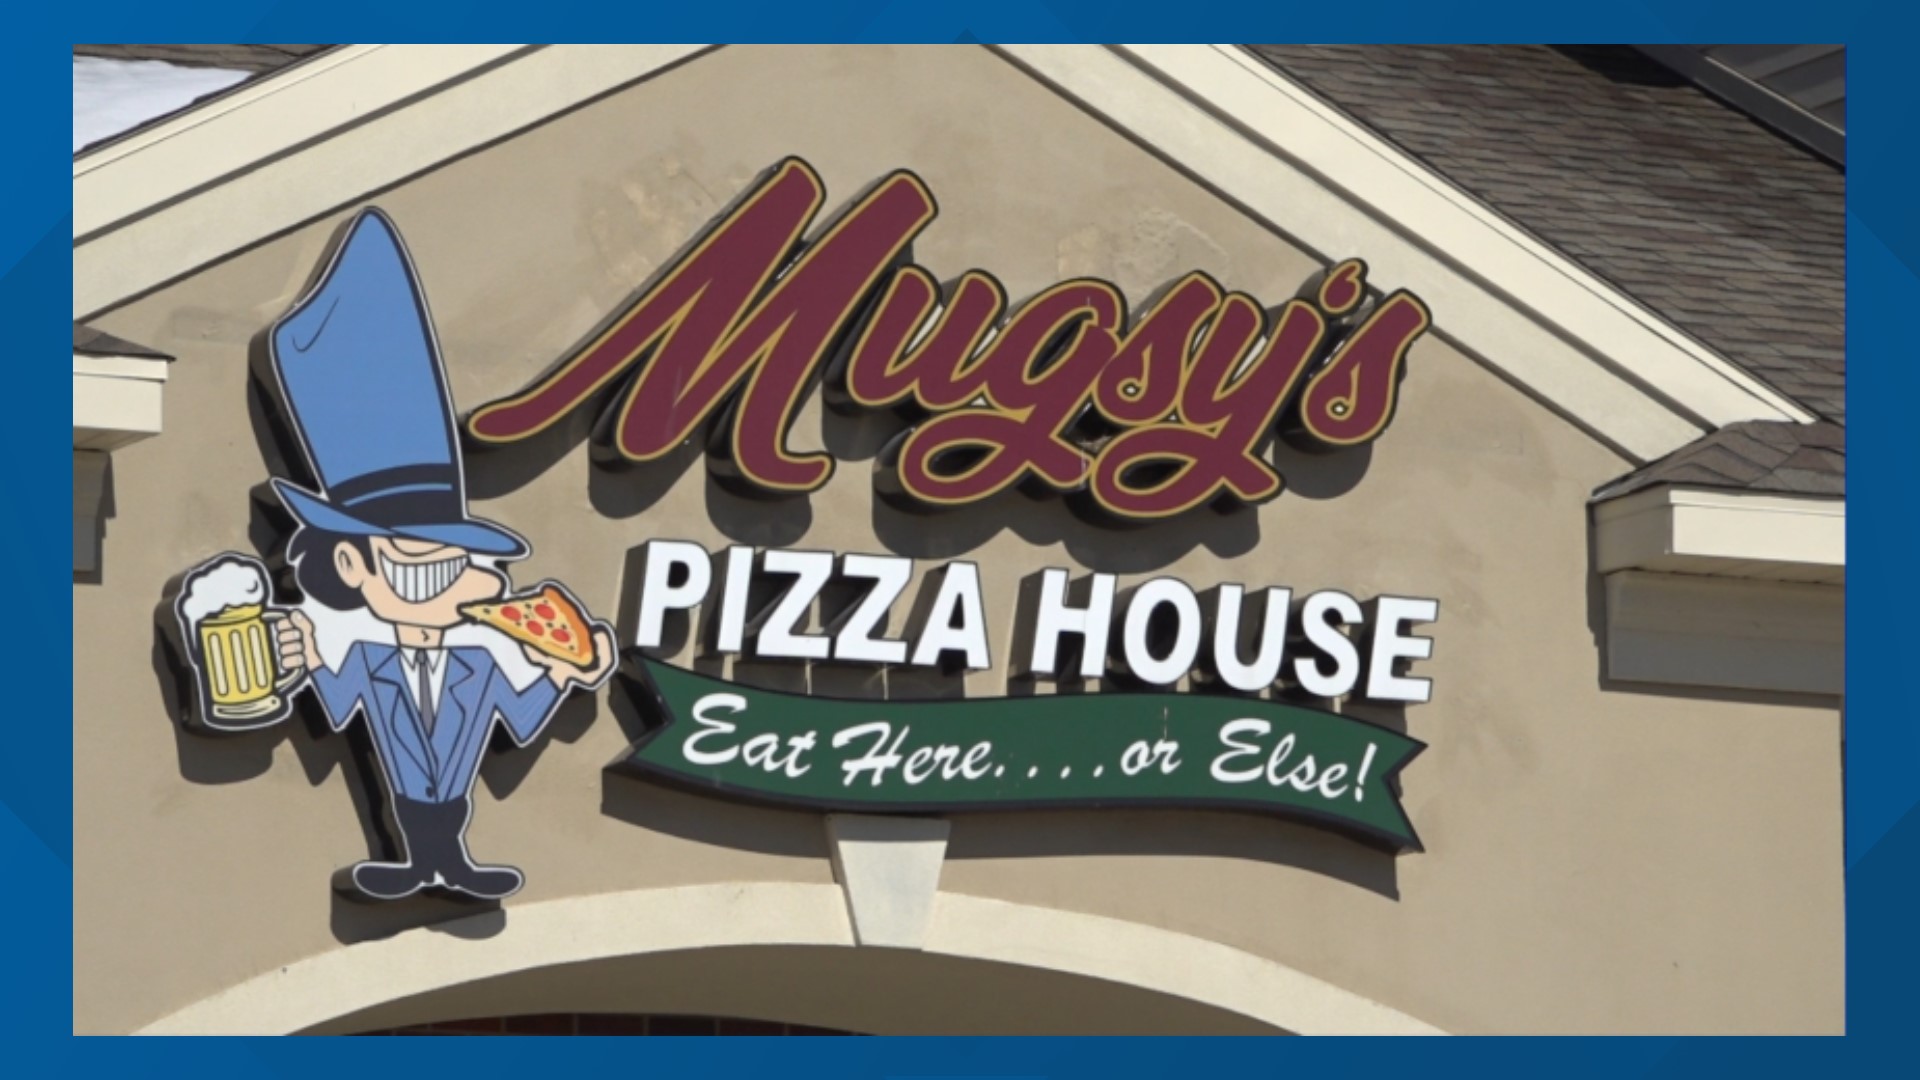 Earlier this week, Local 5 brought viewers the story of Mugsy's employees who claimed the Pleasant Hill pizza spot owed them for bounced paychecks.